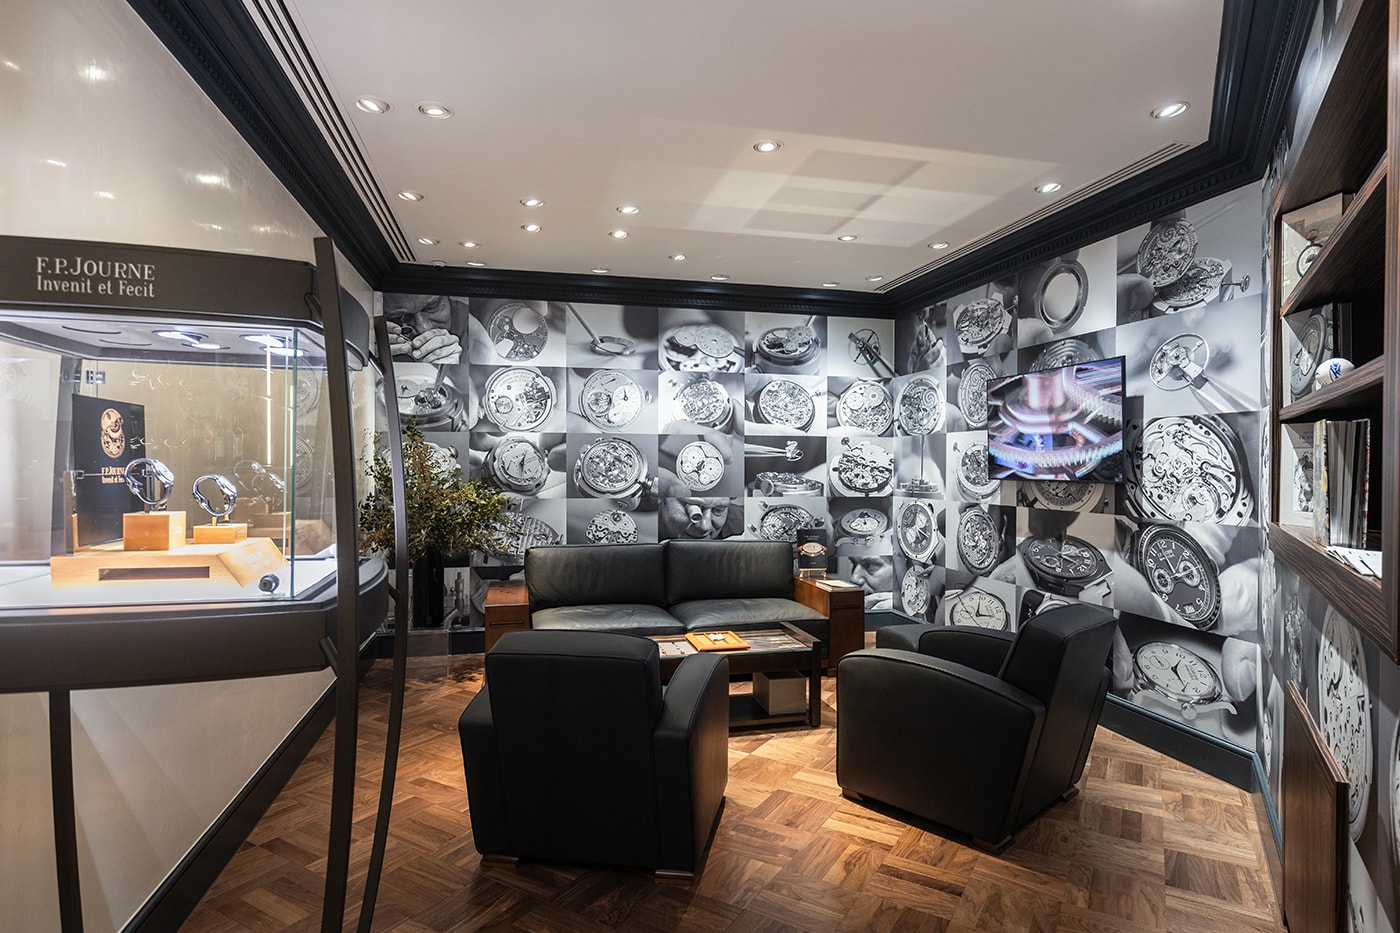 F.P. Journe Mayfair London Boutique Opening Info